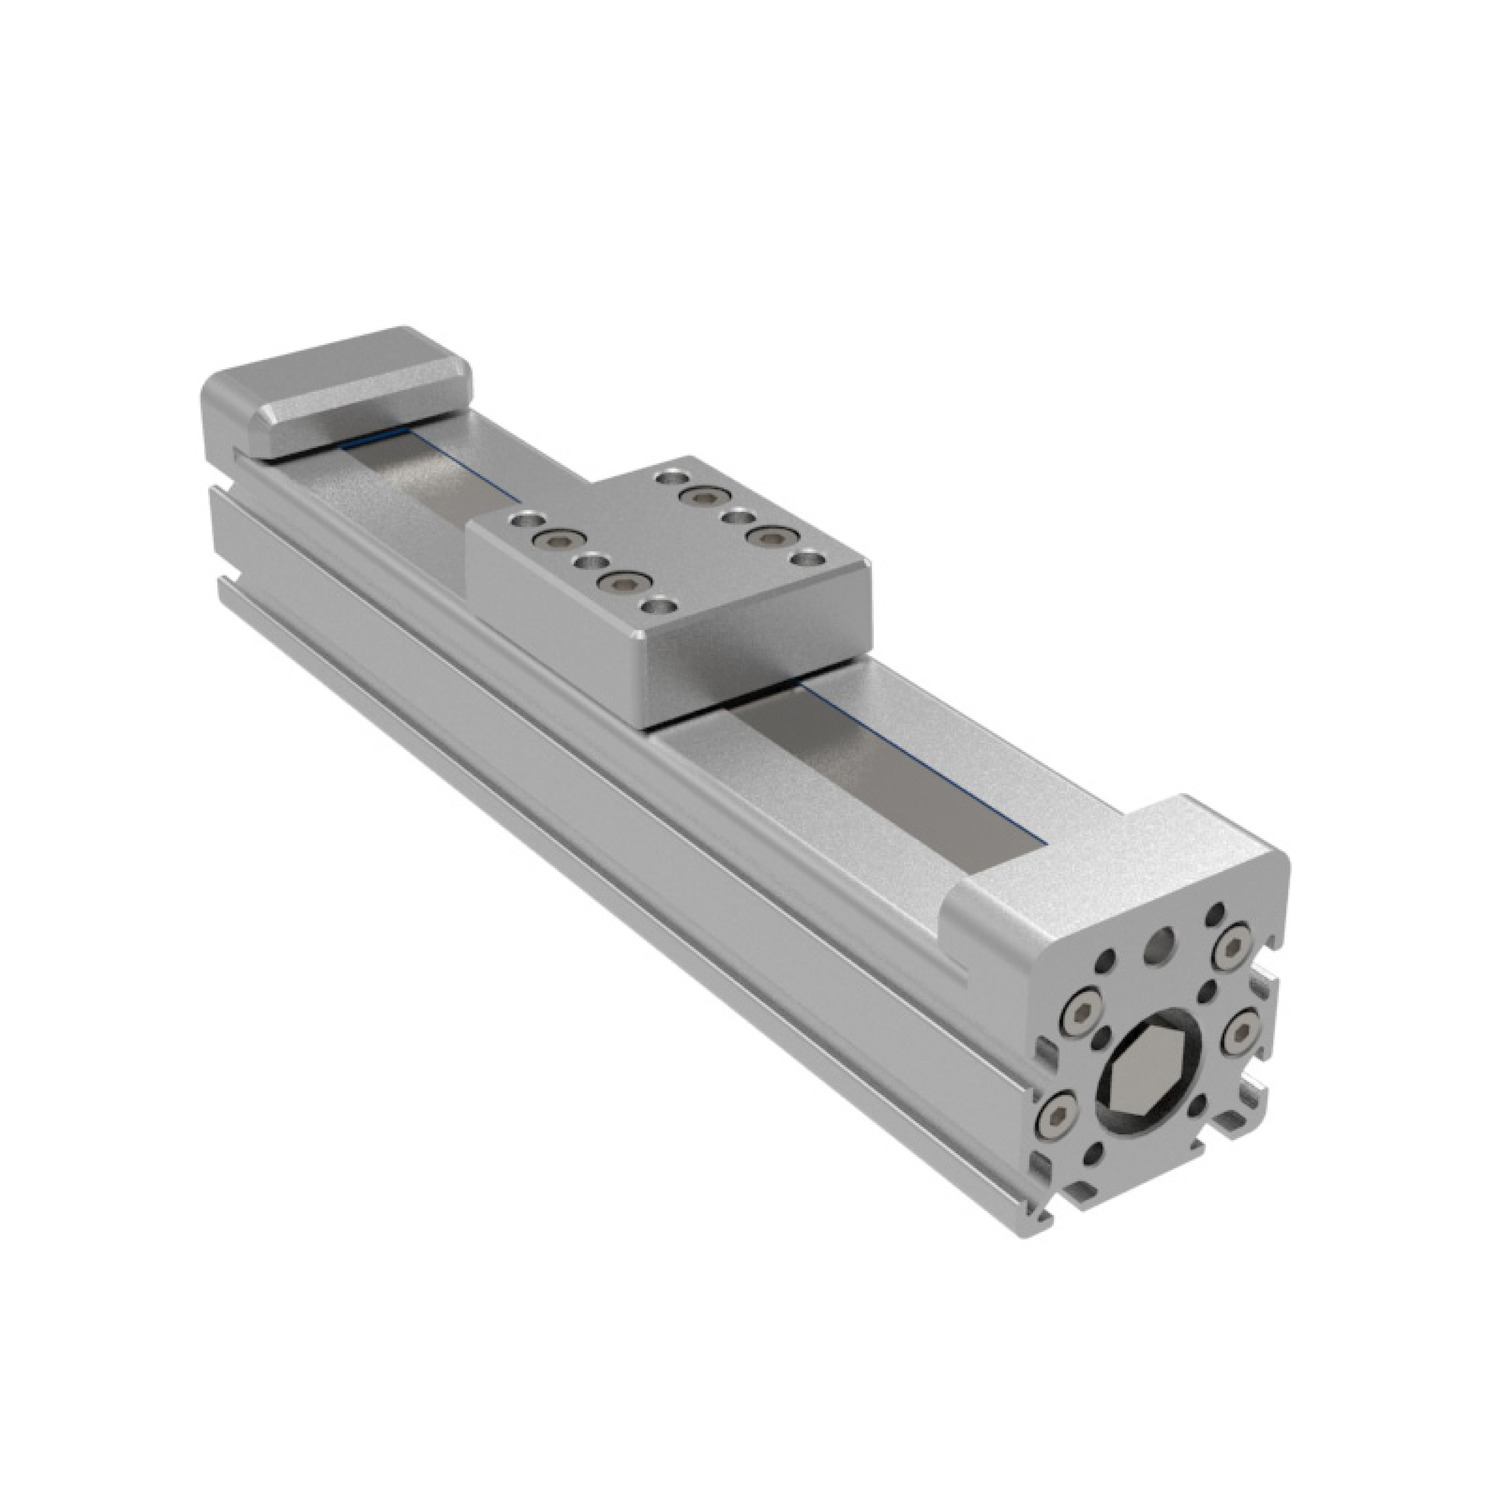 Product L3147.S, Lead Screw Linear Stages single carriage / 